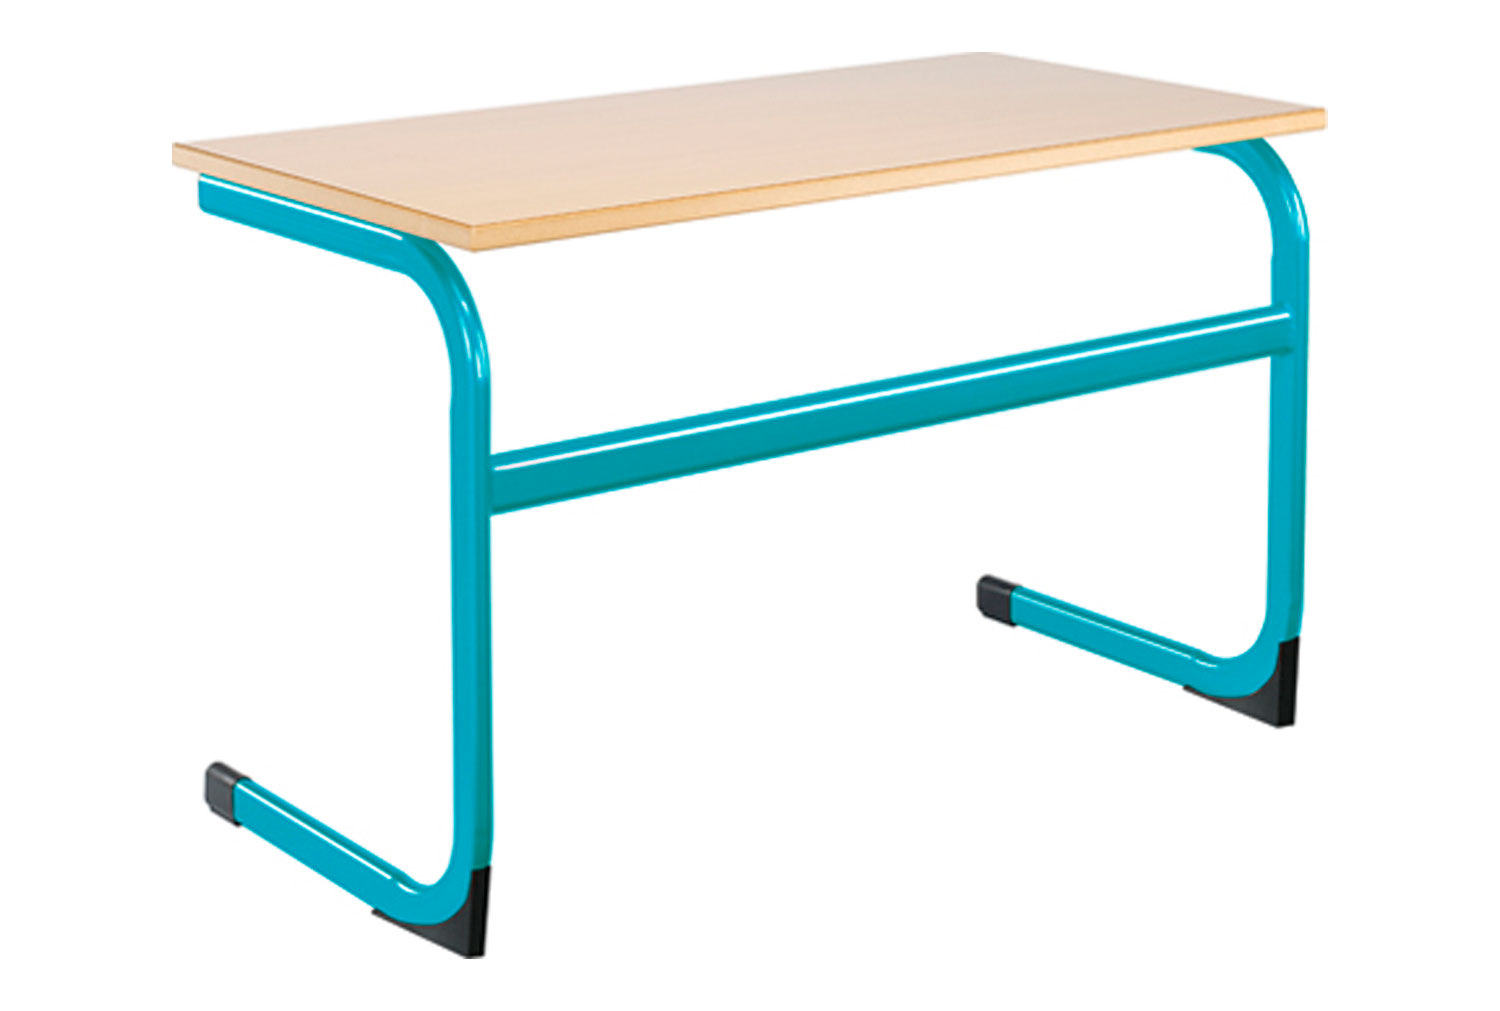 Qty 2 - Euro Large Double Classroom Table 11-14 Years, Charcoal Frame, Blue Top, PU Blue Edge